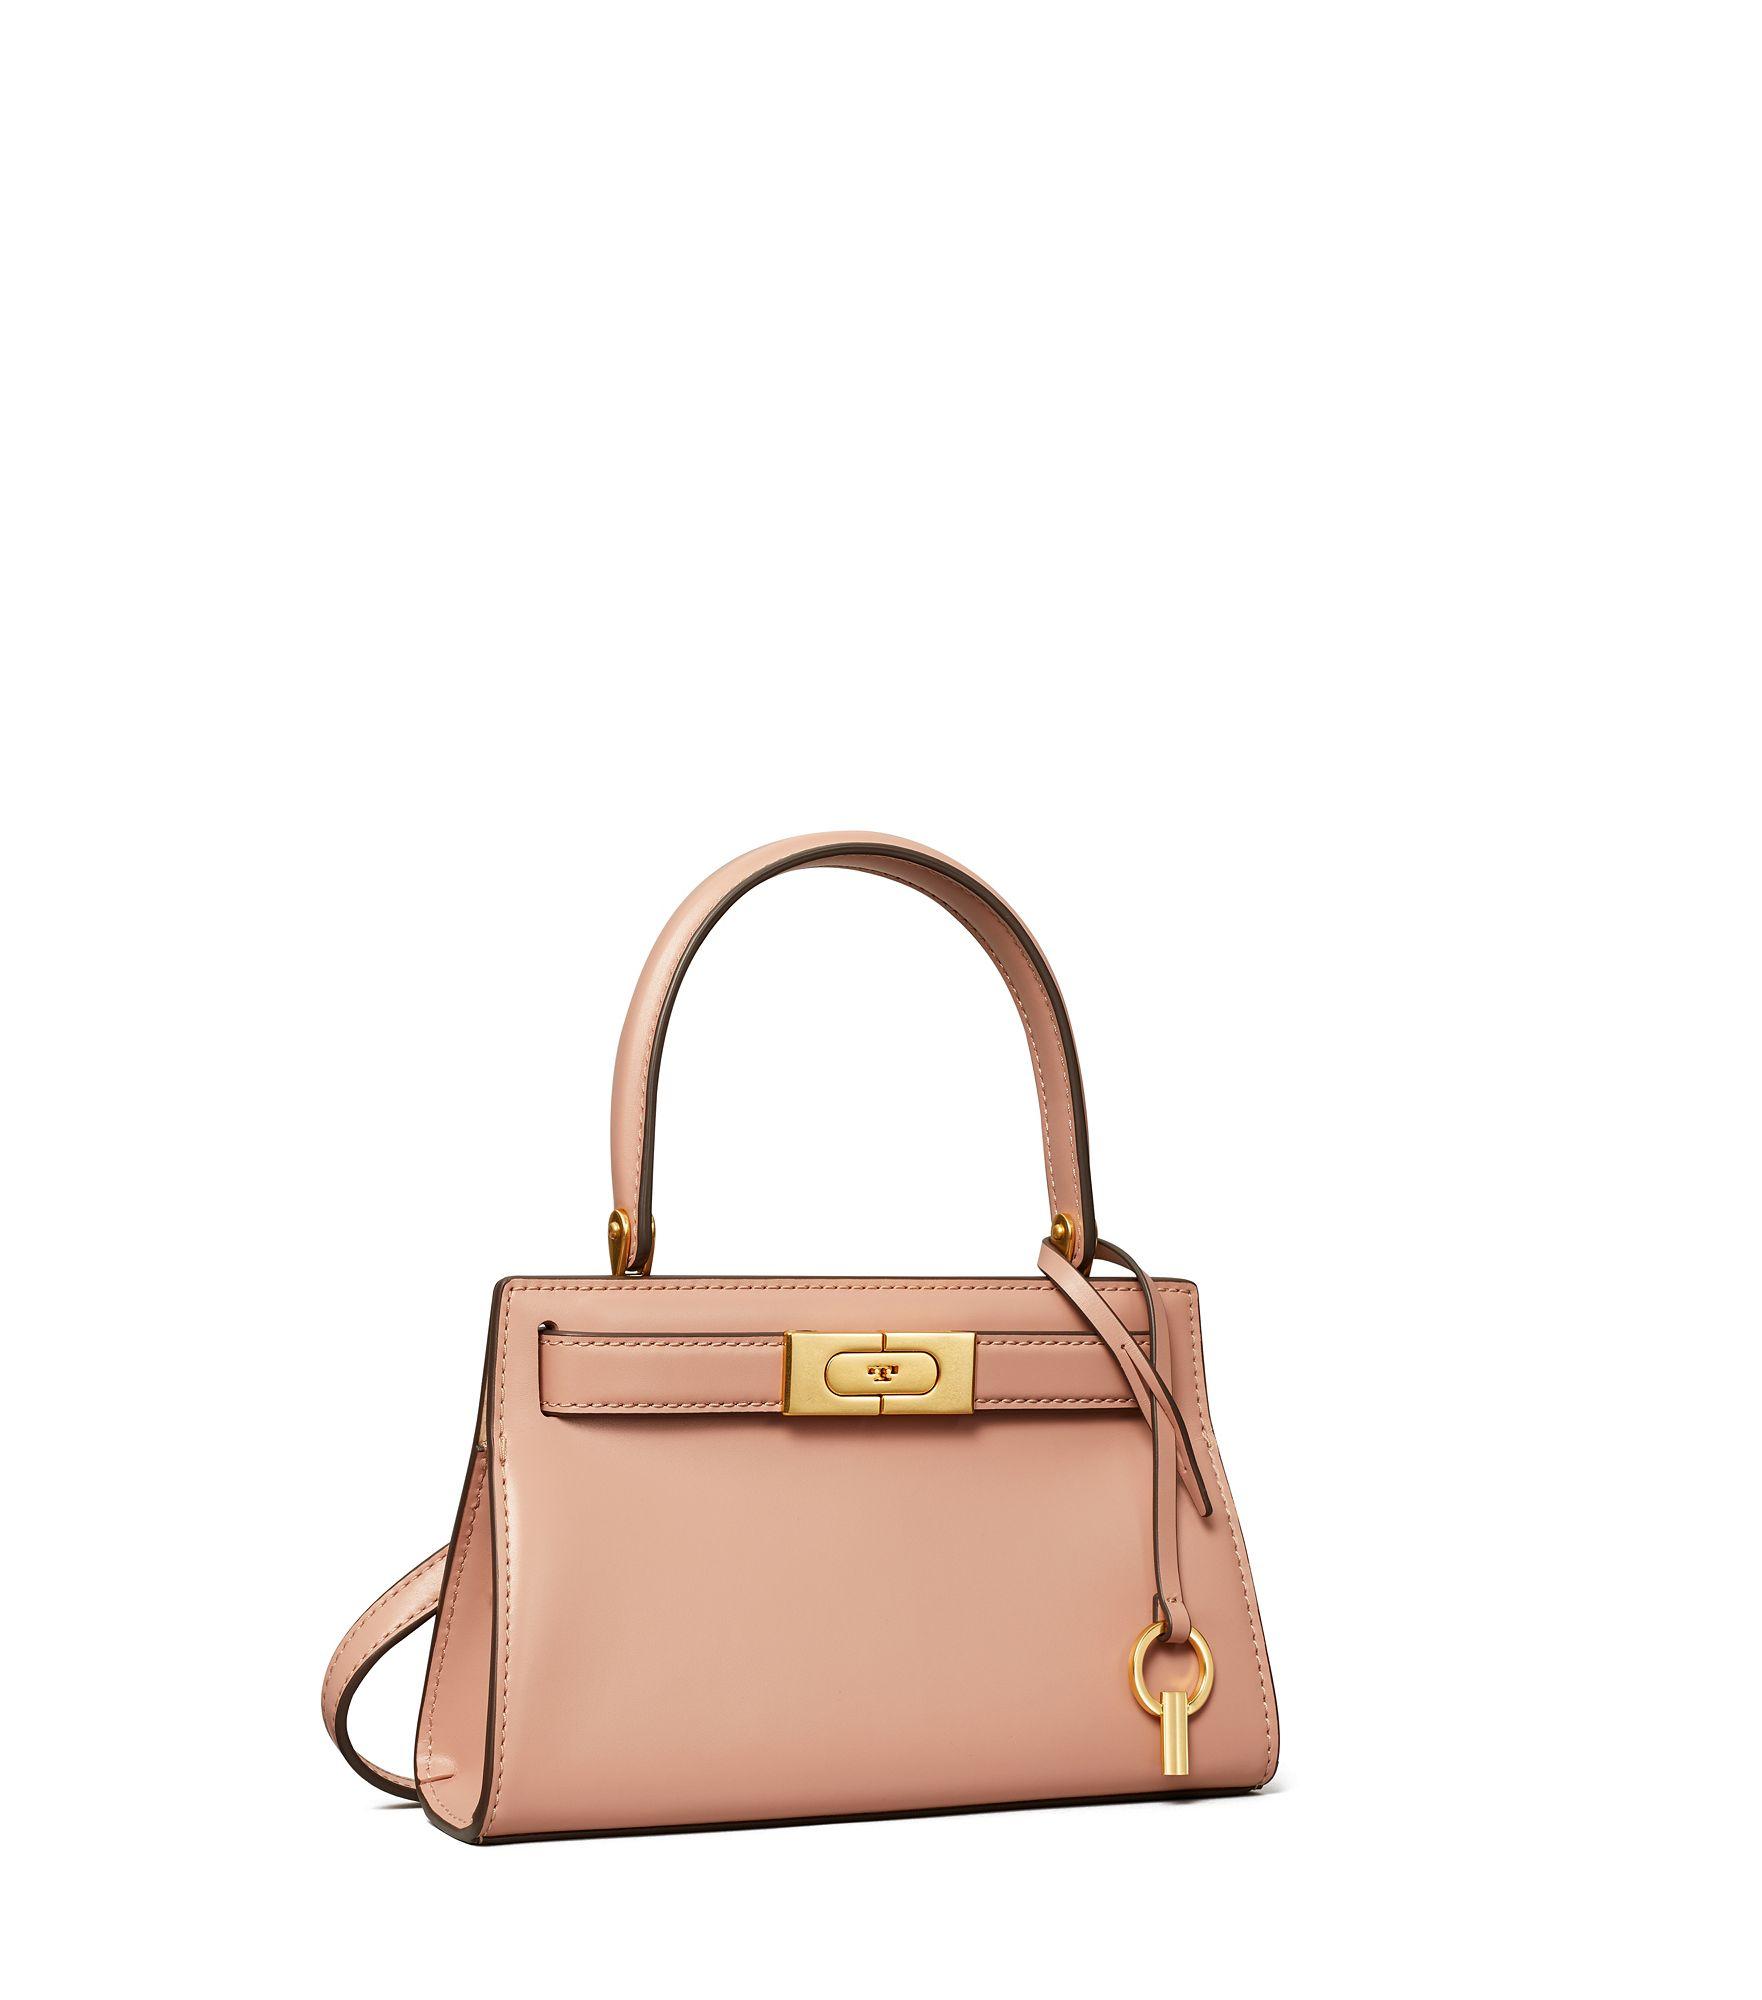 Tory Burch Leather Lee Radziwill Petite Bag in Pink (Yellow) | Lyst